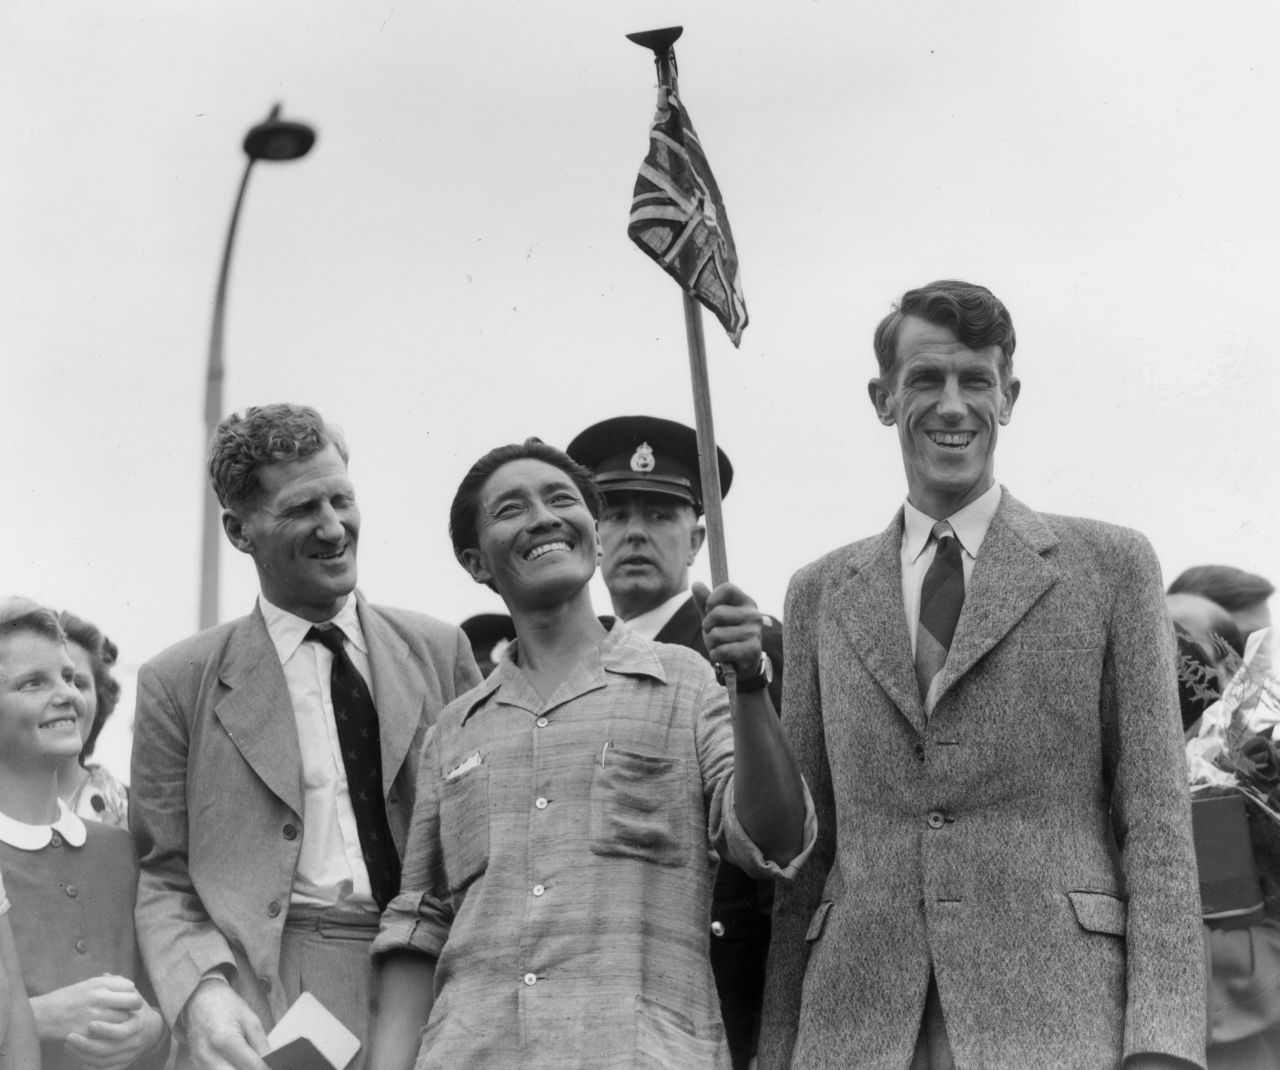 Tenzing Norgay (C), better known as Sherpa Tensing, and Edmund Hillary (R) were the <a href="http://www.guinnessworldrecords.com/world-records/first-ascent-of-mount-everest" target="_blank" target="_blank">first to complete a successful ascent</a> to the top of the world in May 1953.